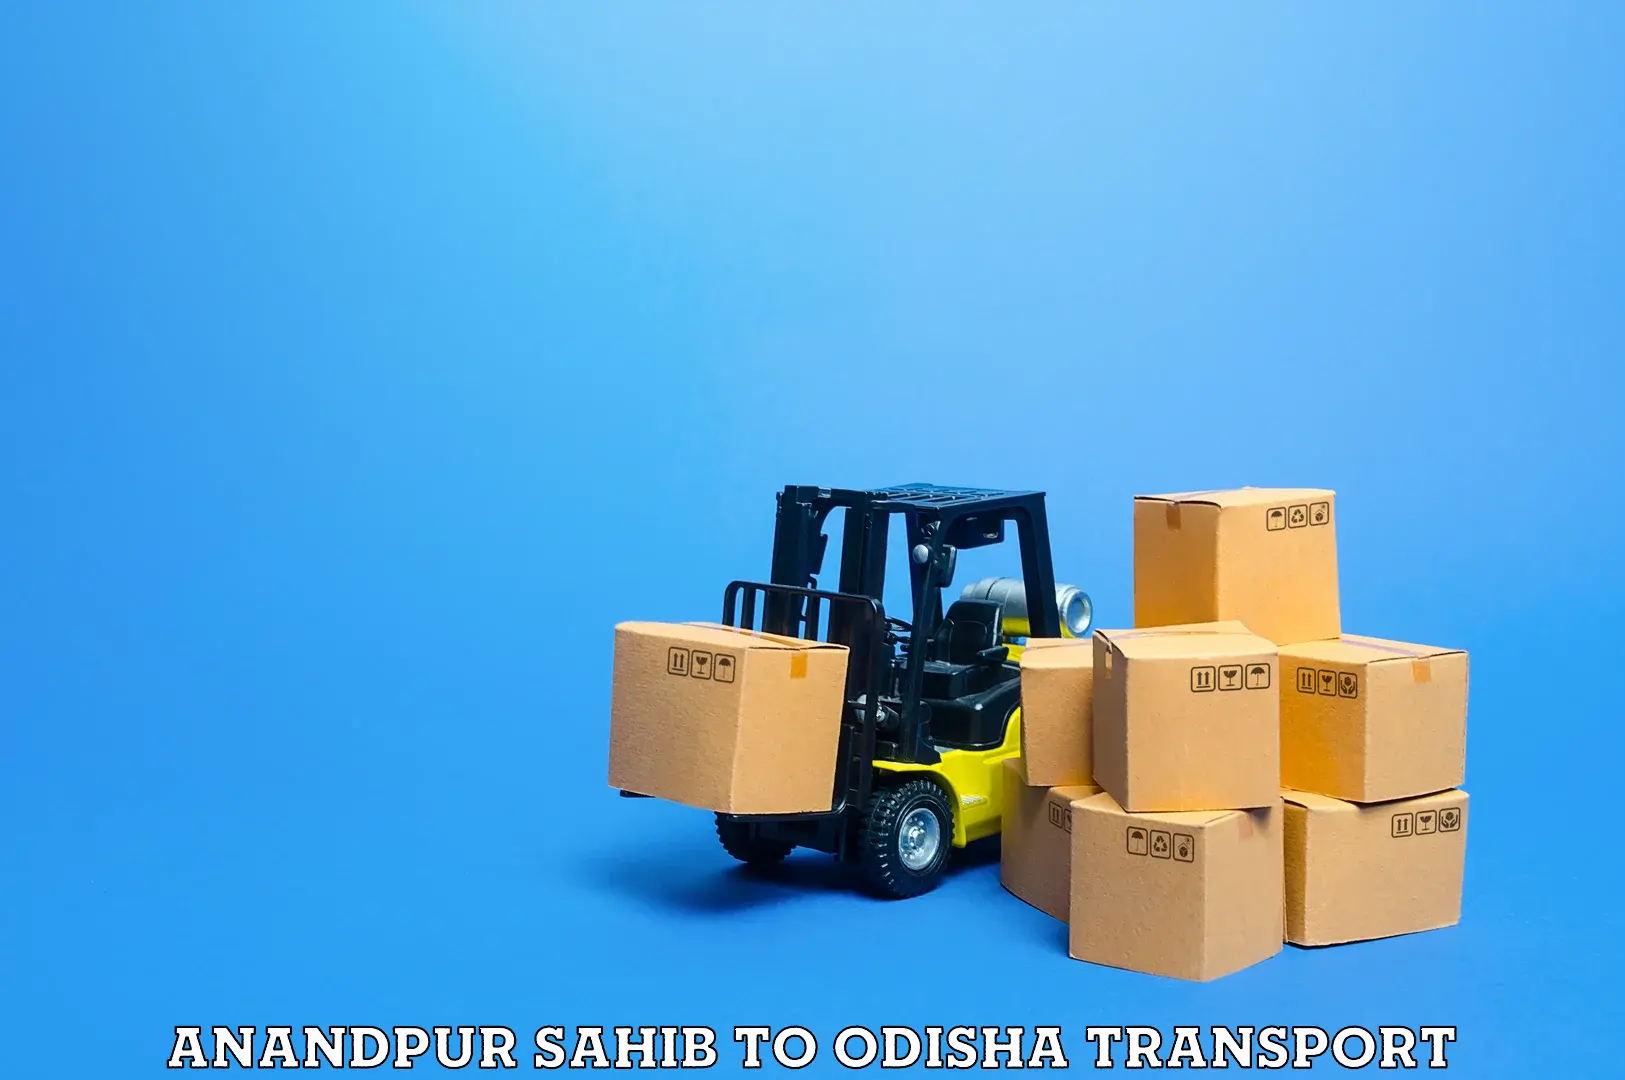 Daily parcel service transport in Anandpur Sahib to Mayurbhanj